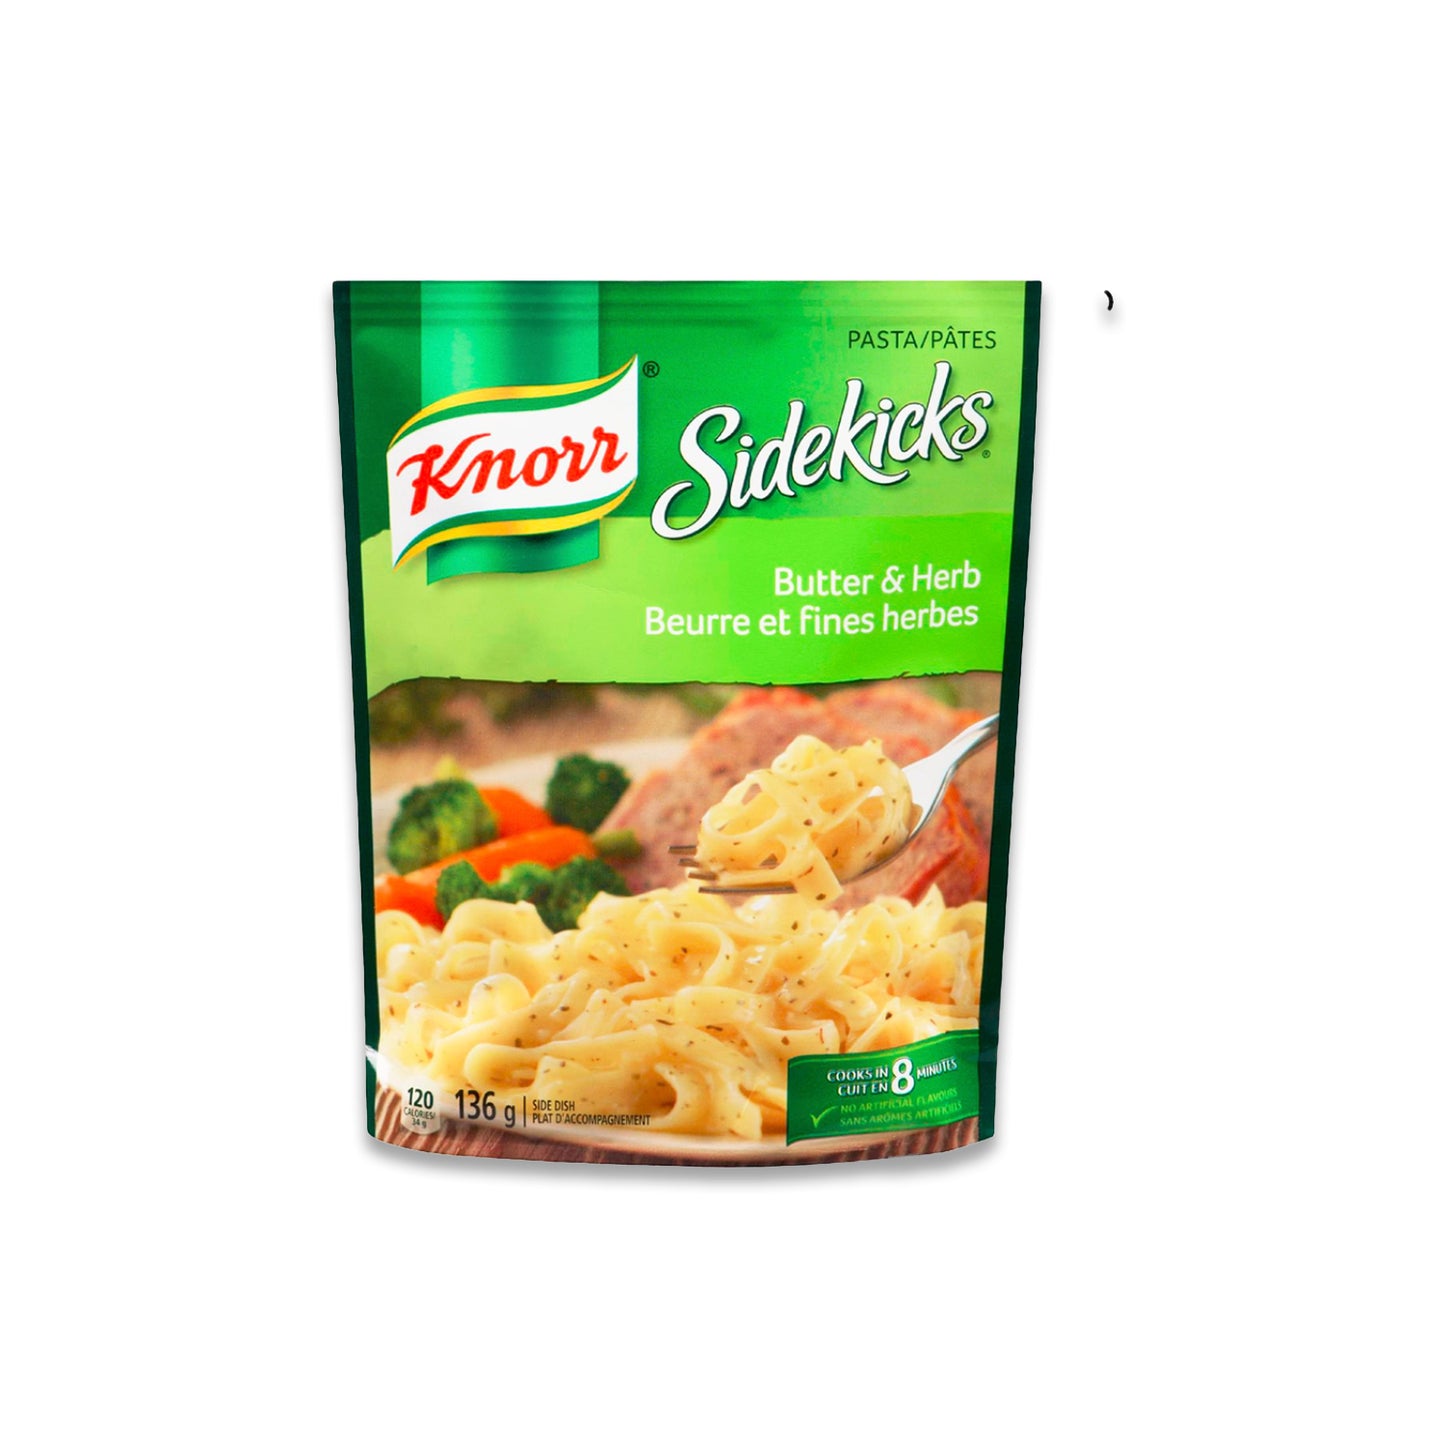 Pasta - Knorr Side Kicks (Butter and Herb)